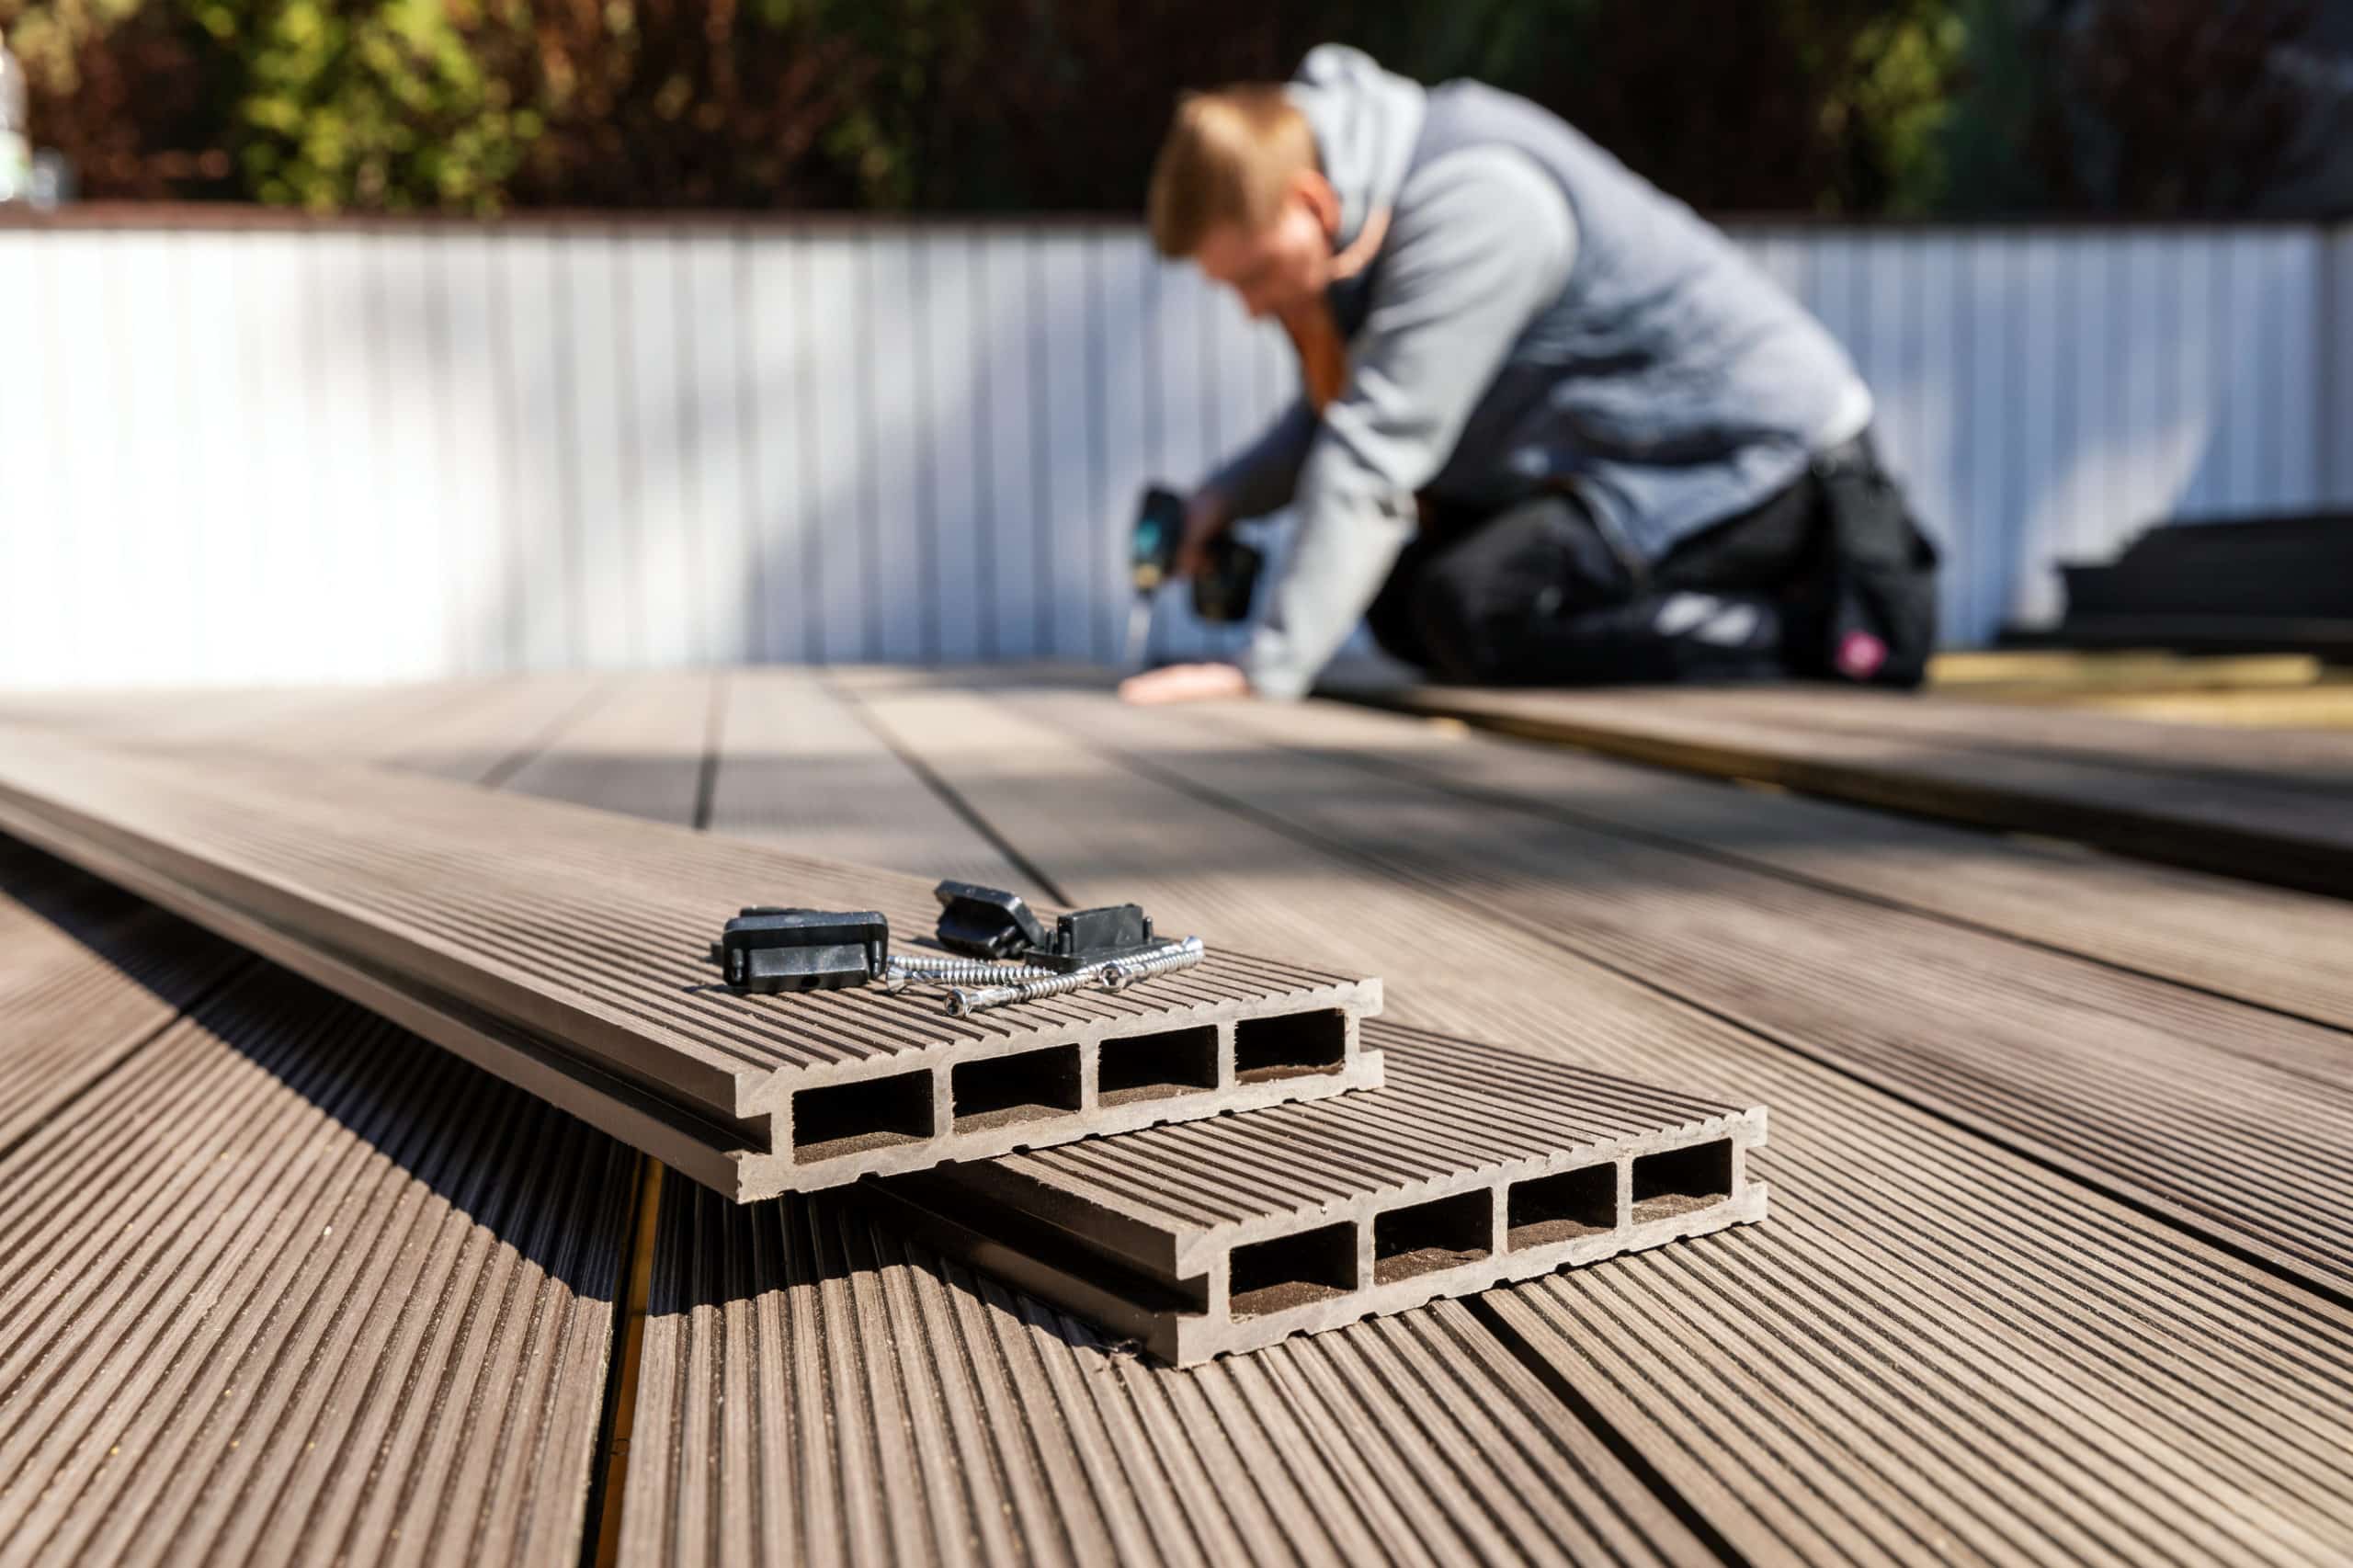 A decking and fencing contractor who is dominating the competition builds a deck from composite materials. He is in the background working while his building materials are stacked in the foreground.